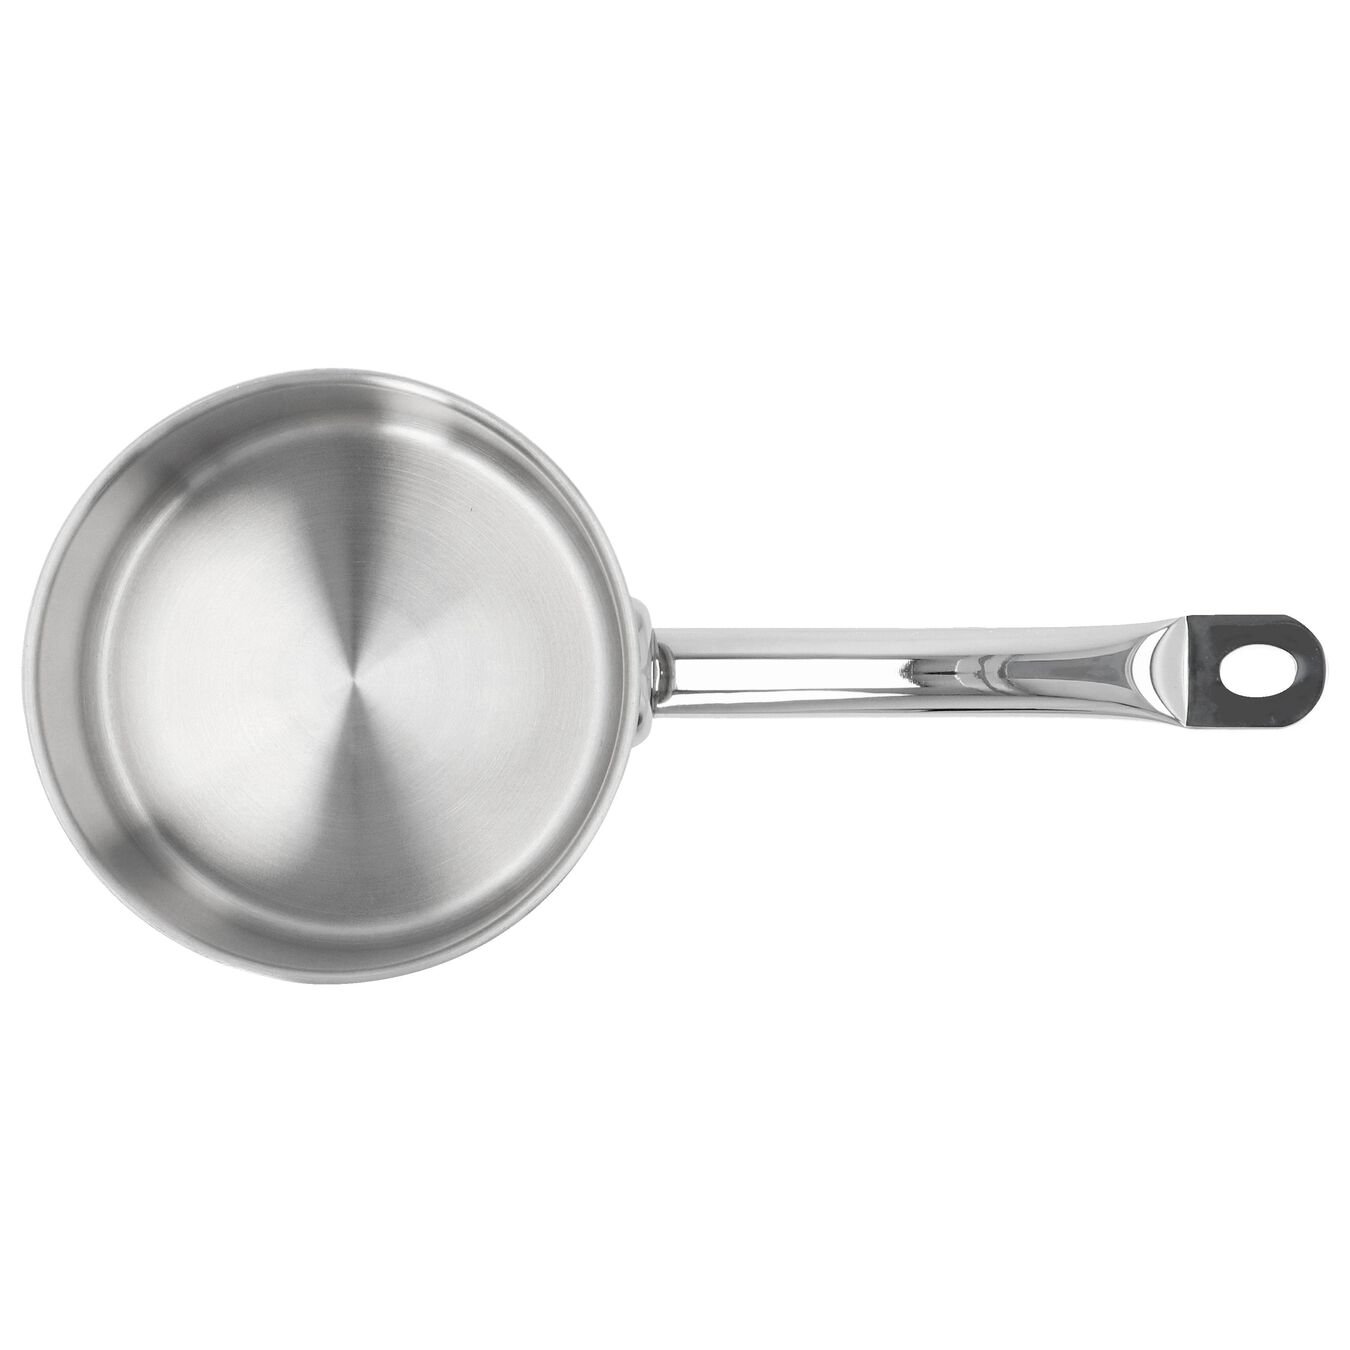 16 cm 18/10 Stainless Steel Saucepan with lid silver,,large 6